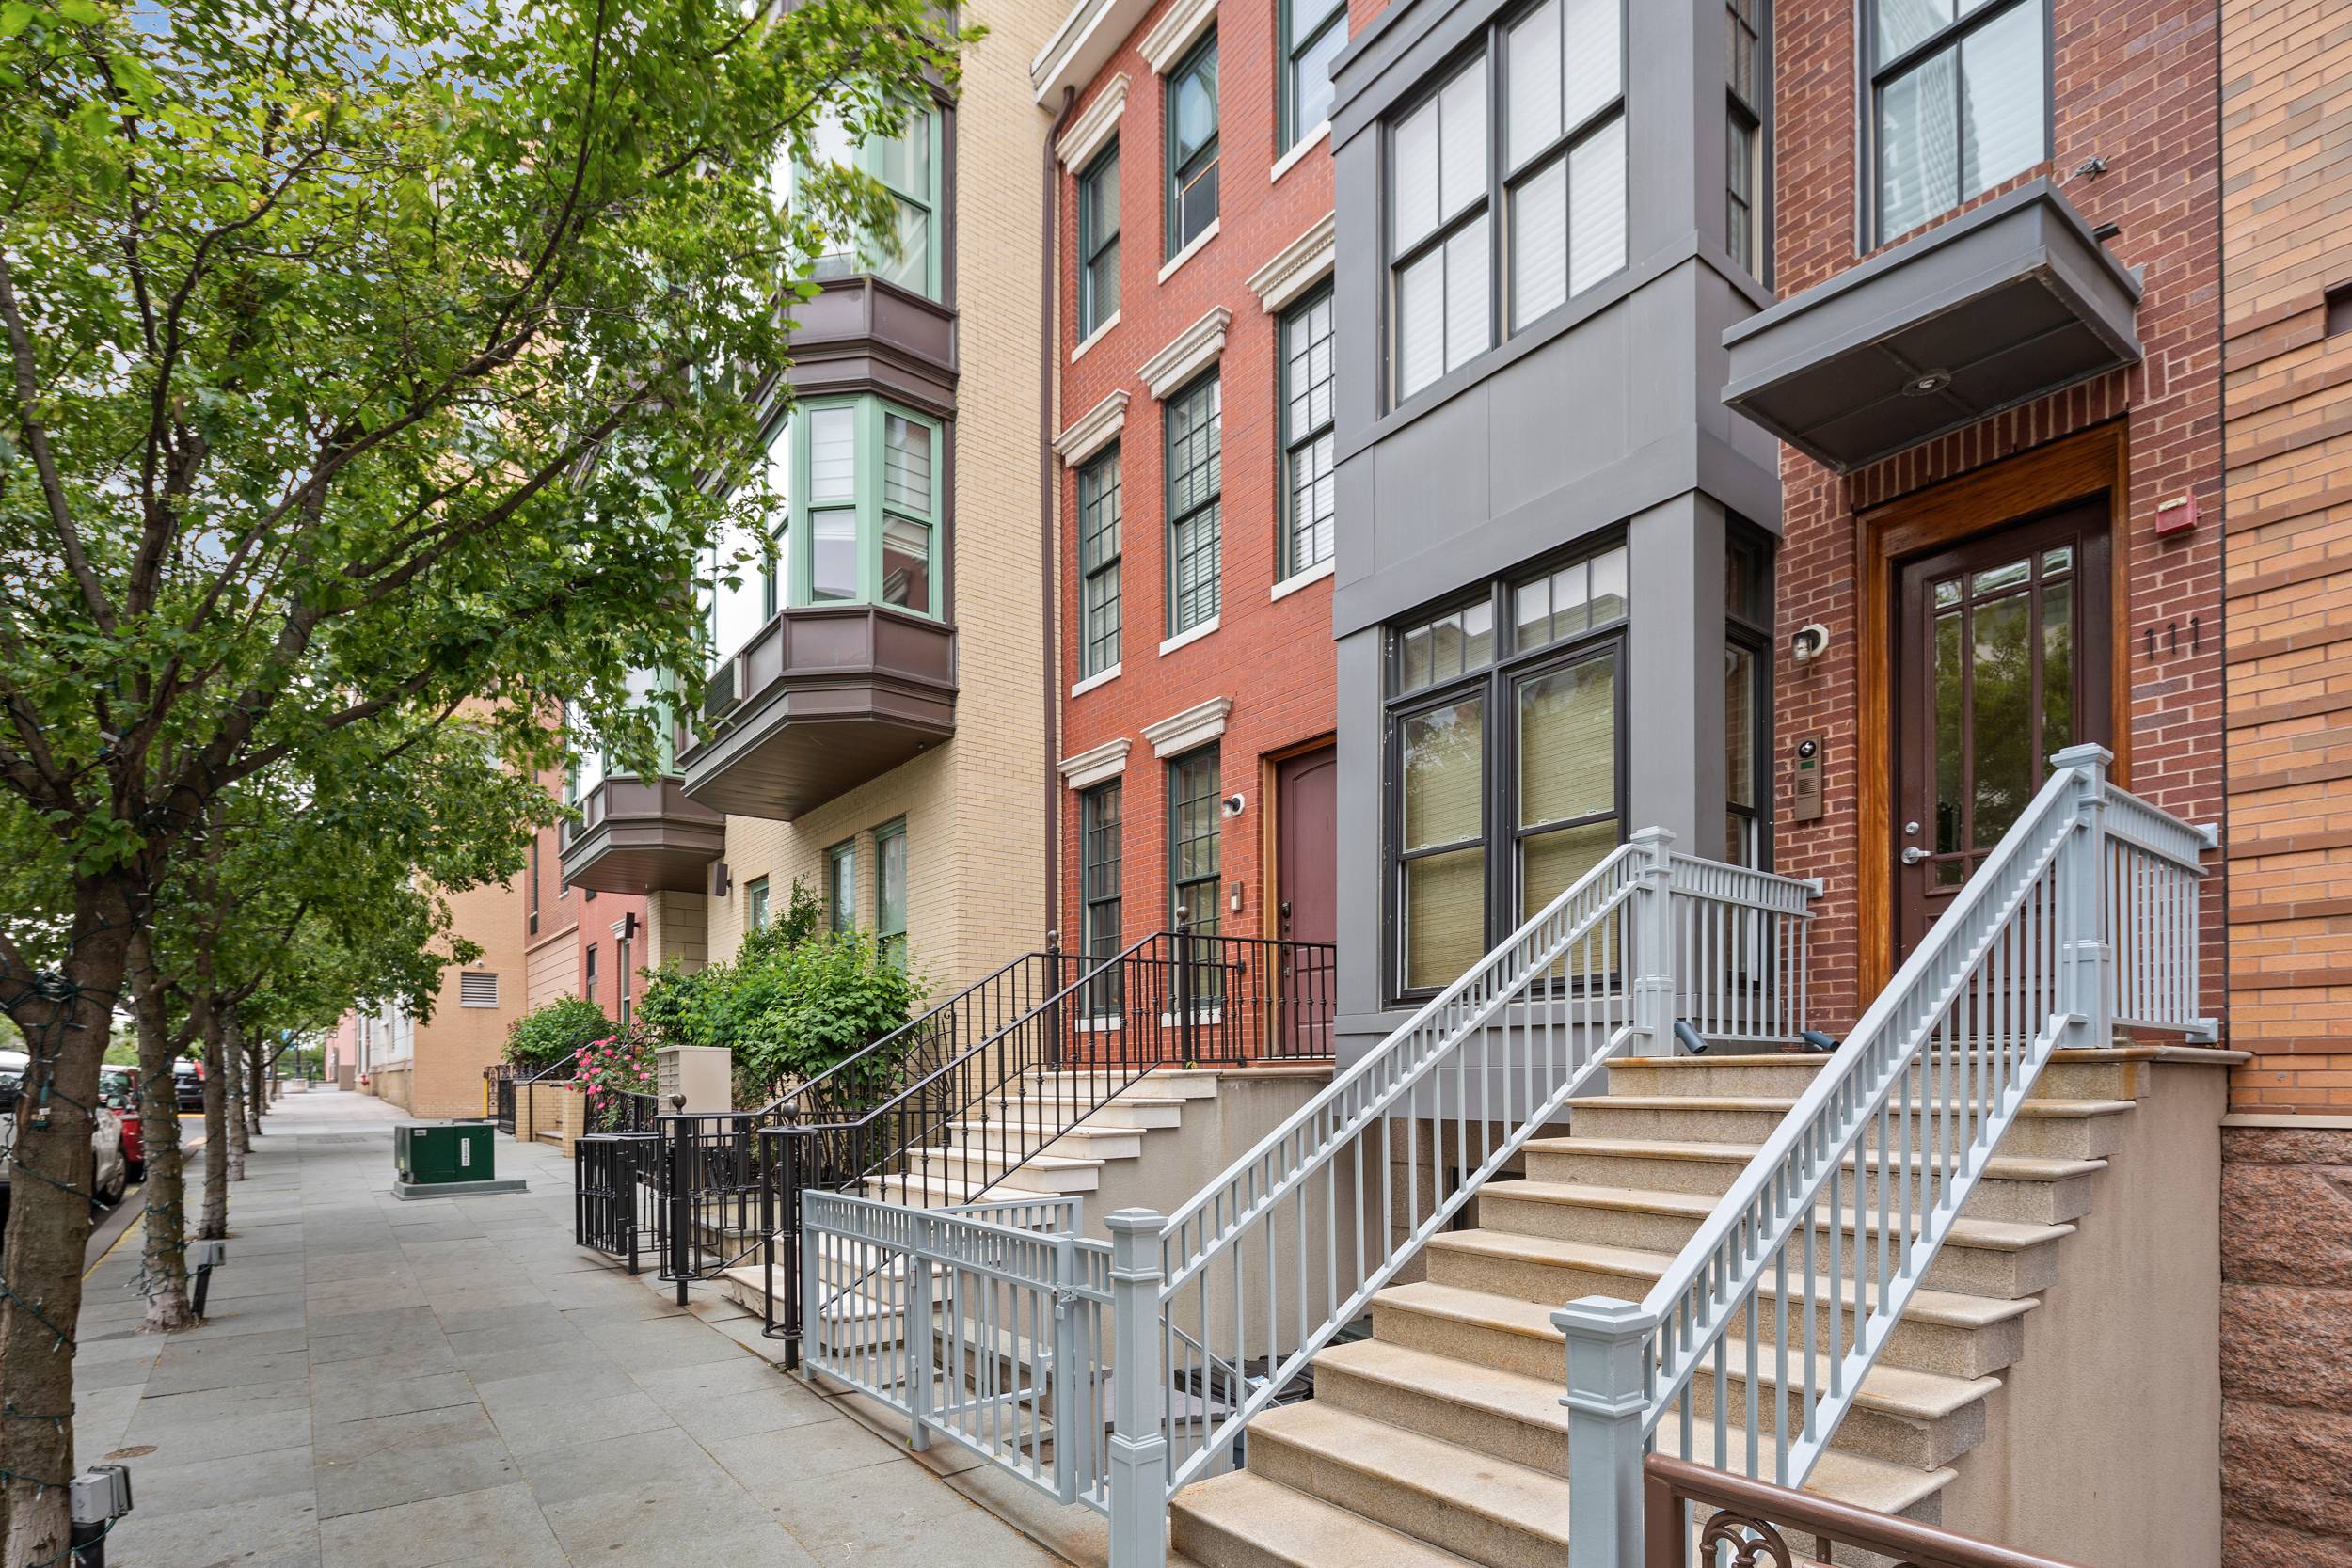 Brownstone-StyleHome with Access to Many Amenities in Downtown Jersey City